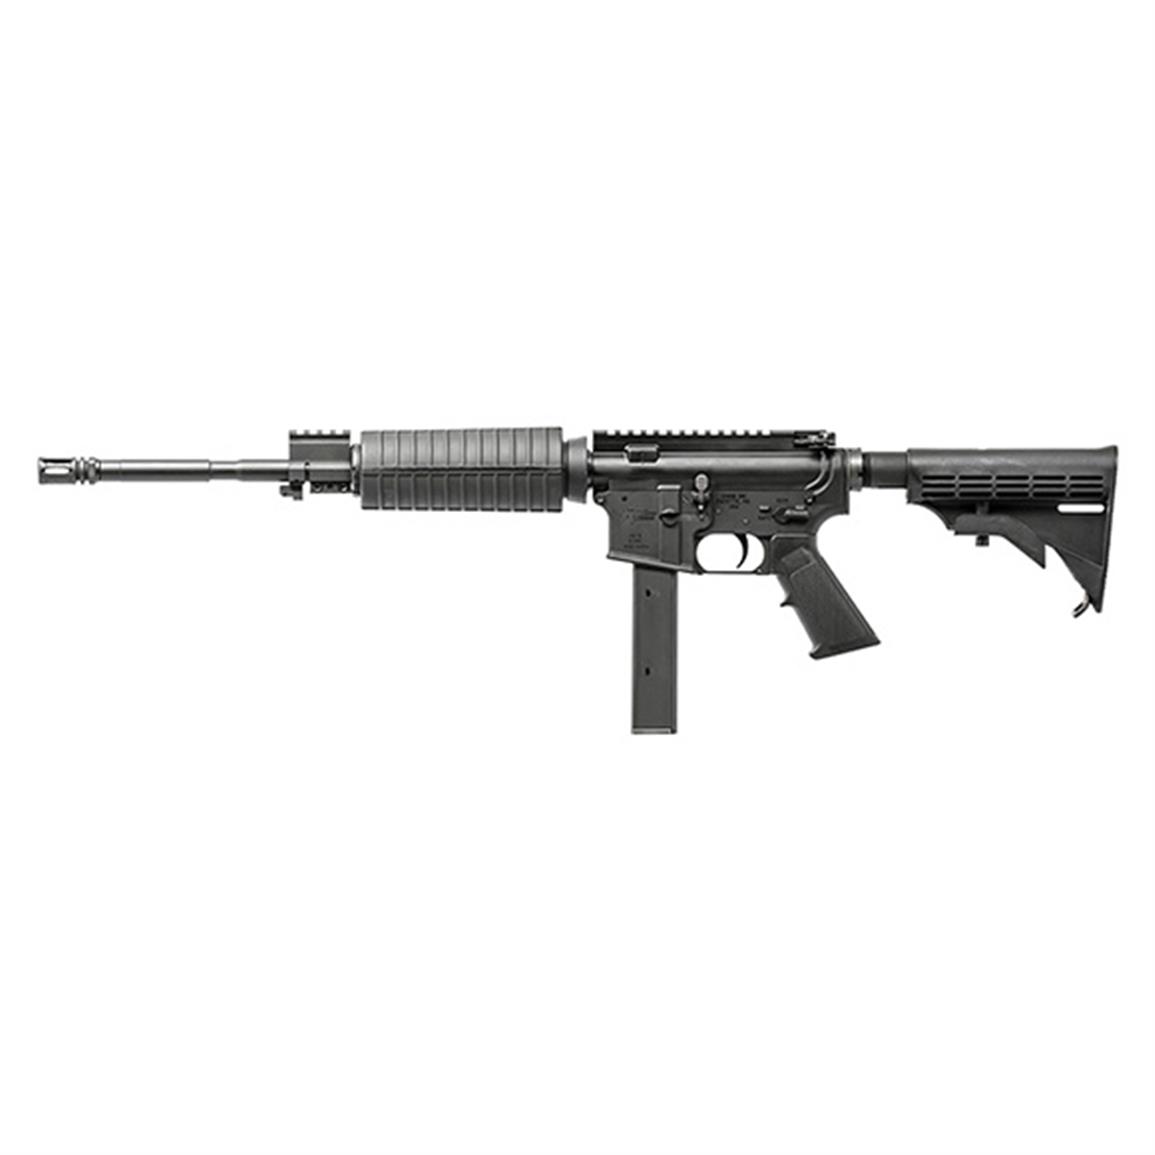 CMMG Mk9LE OR AR-Style, Semi-Automatic, 9mm, 16" Barrel, 32+1 Rounds